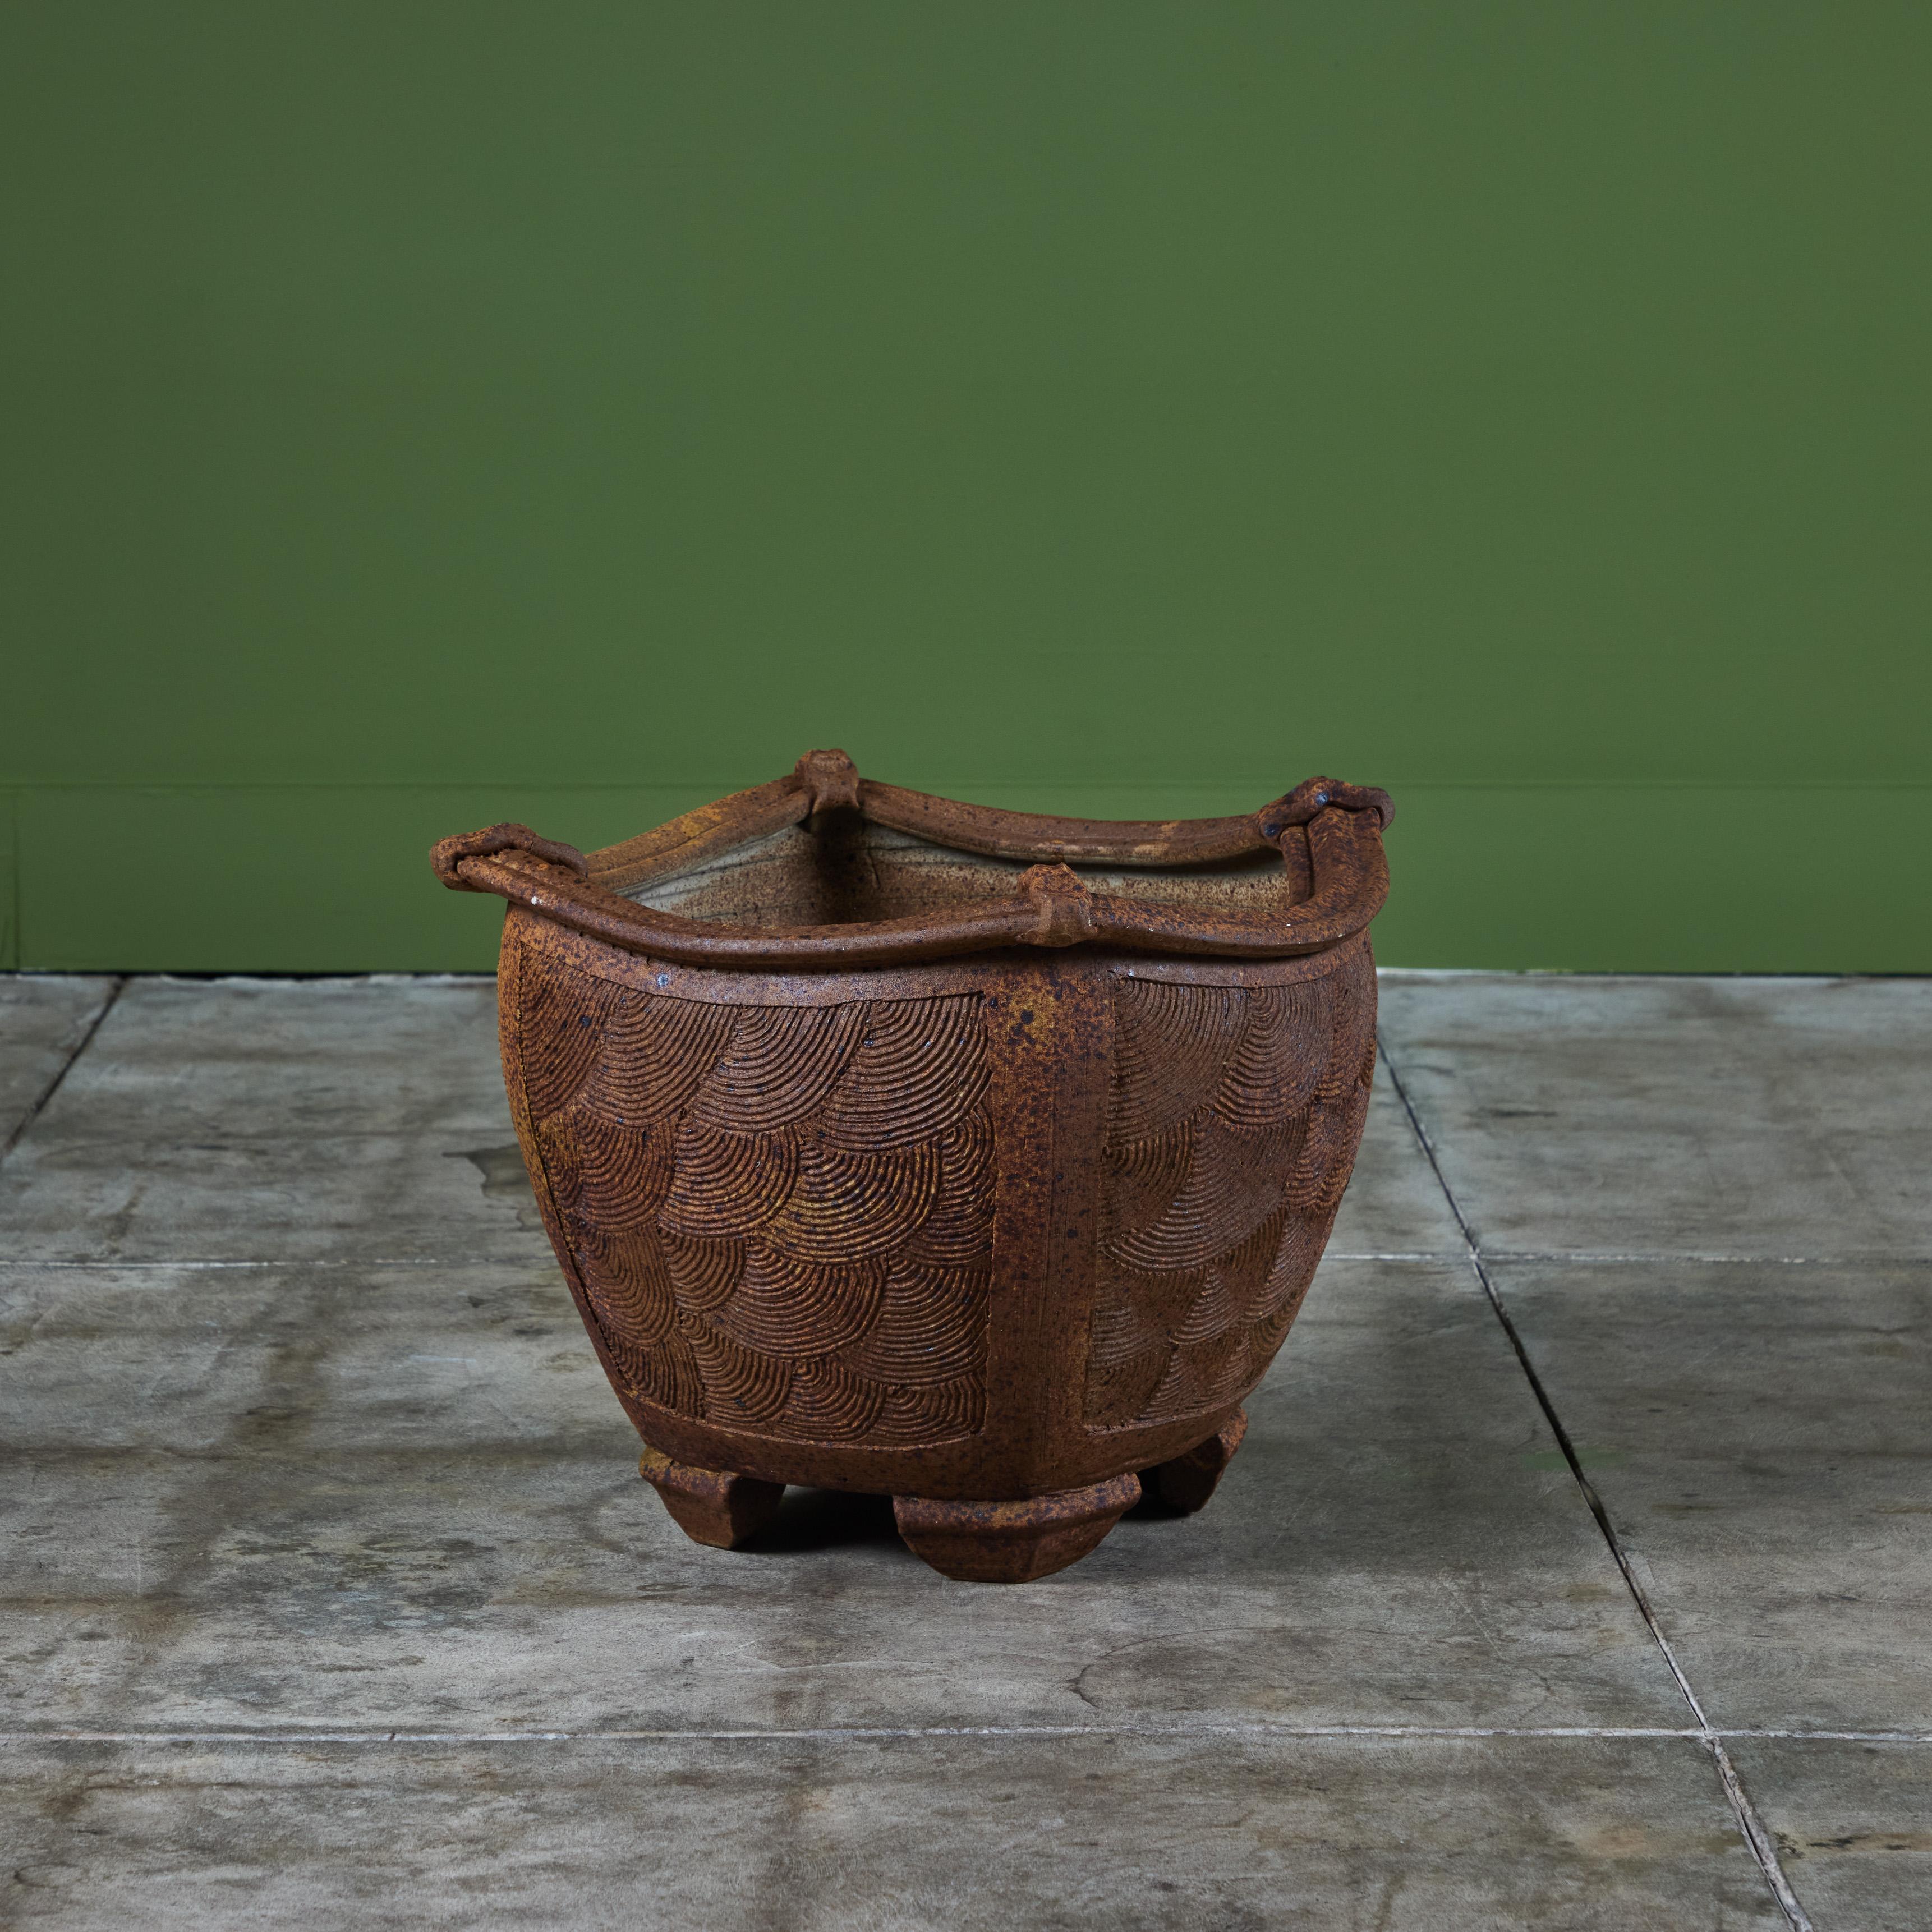 Hand thrown stoneware planter by Italian American artist Angelo Garzio, c.1970, USA. This planter features a square vessel with rounded sides showcasing a circular incised pattern. The rim of the planter has a slightly curved ornate lip. The planter